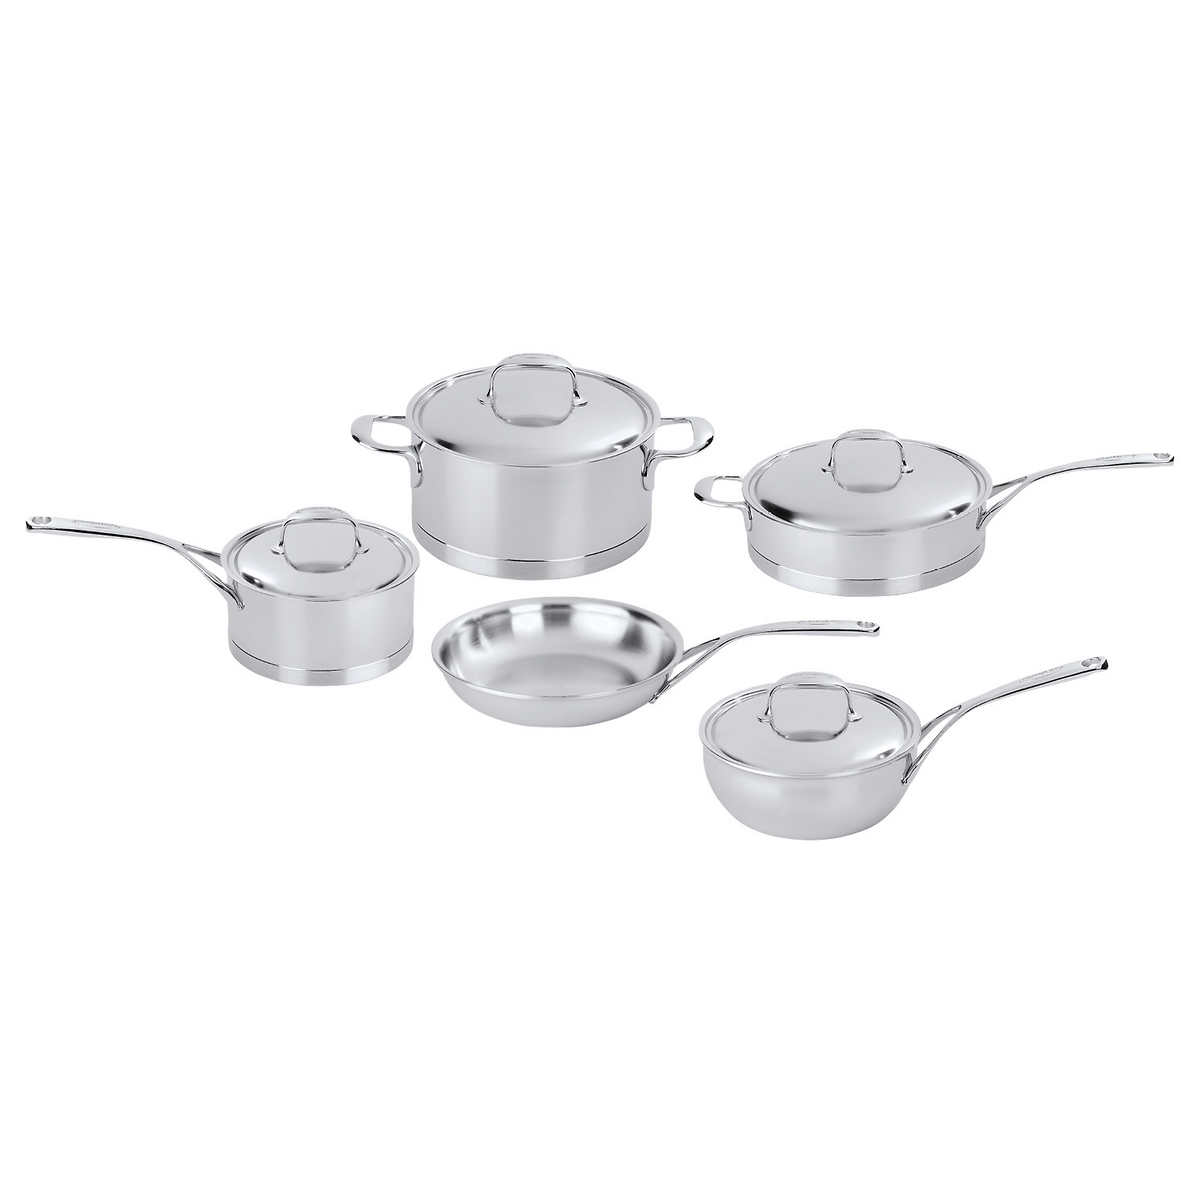 YMMV Tramontina 12-piece Tri-Ply Clad Stainless Steel Cookware Set